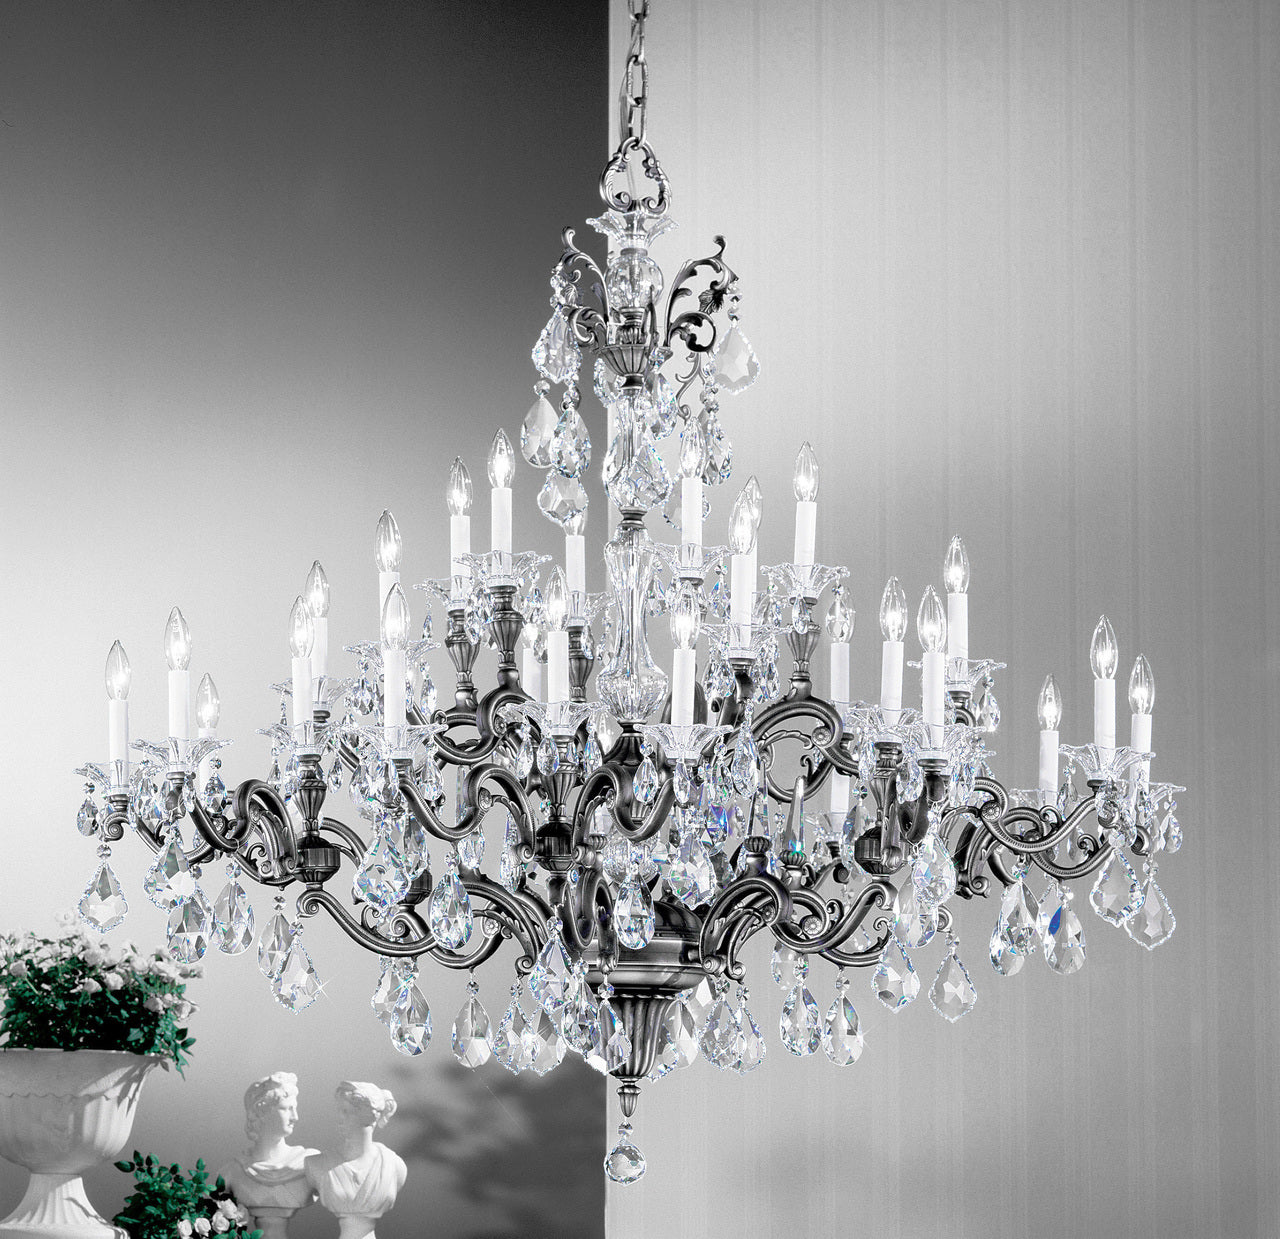 Classic Lighting 57130 BBK S Via Firenze Crystal Chandelier in Bronze/Black Patina (Imported from Spain)